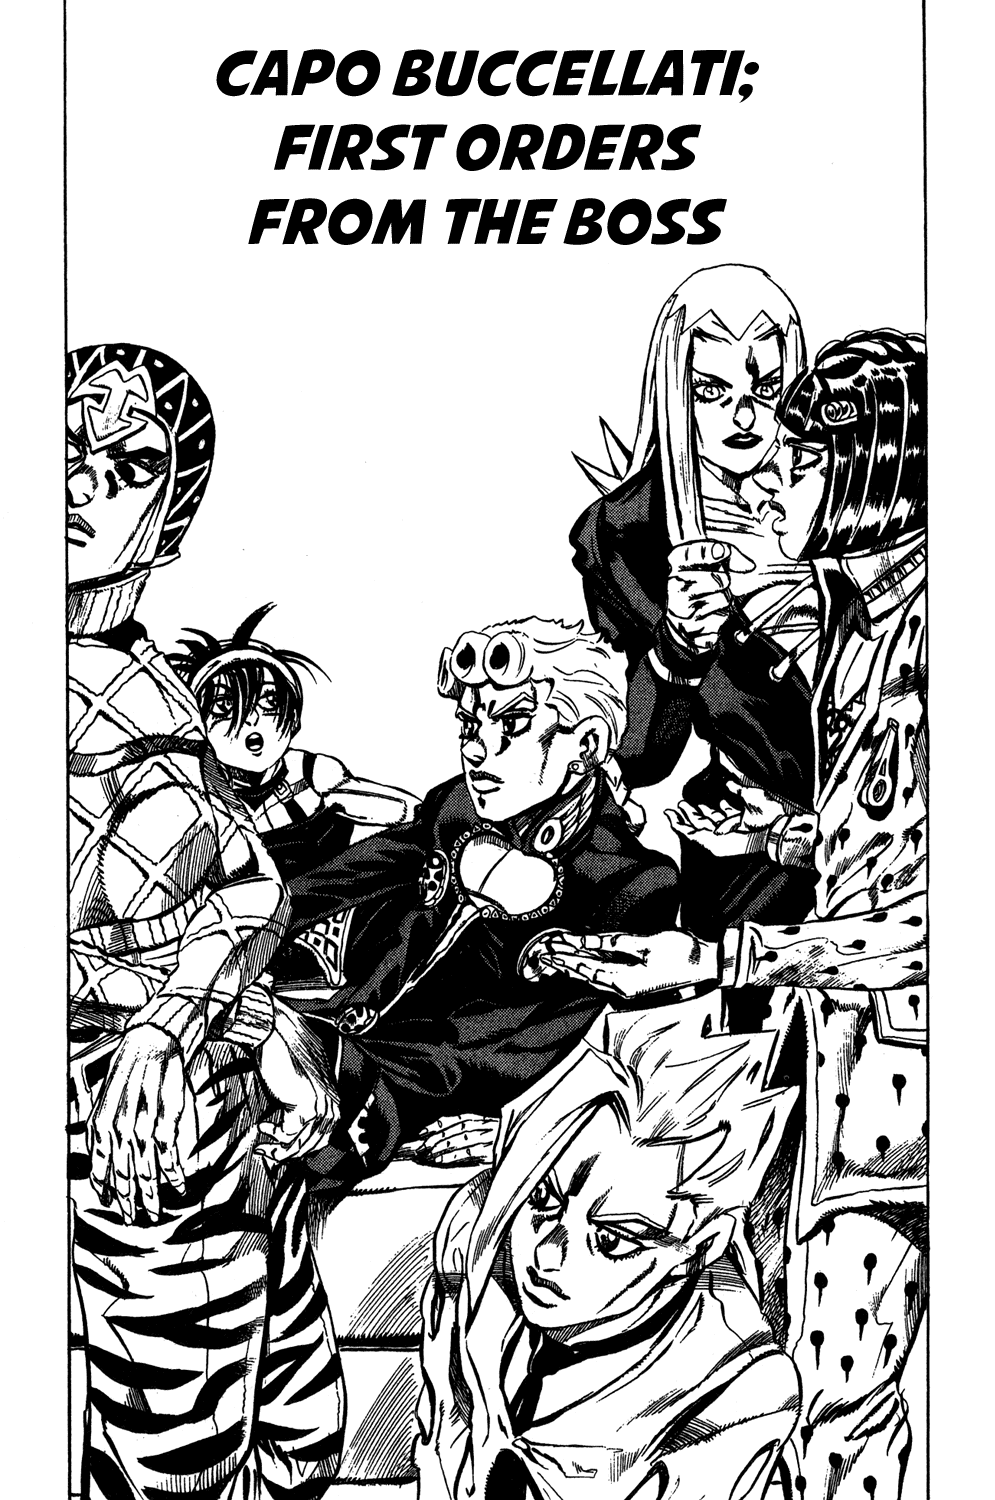 Jojo's Bizarre Adventure Part 5 - Vento Aureo Vol.4 Chapter 30: Capo Buccellati; First Orders From The Boss - Picture 1